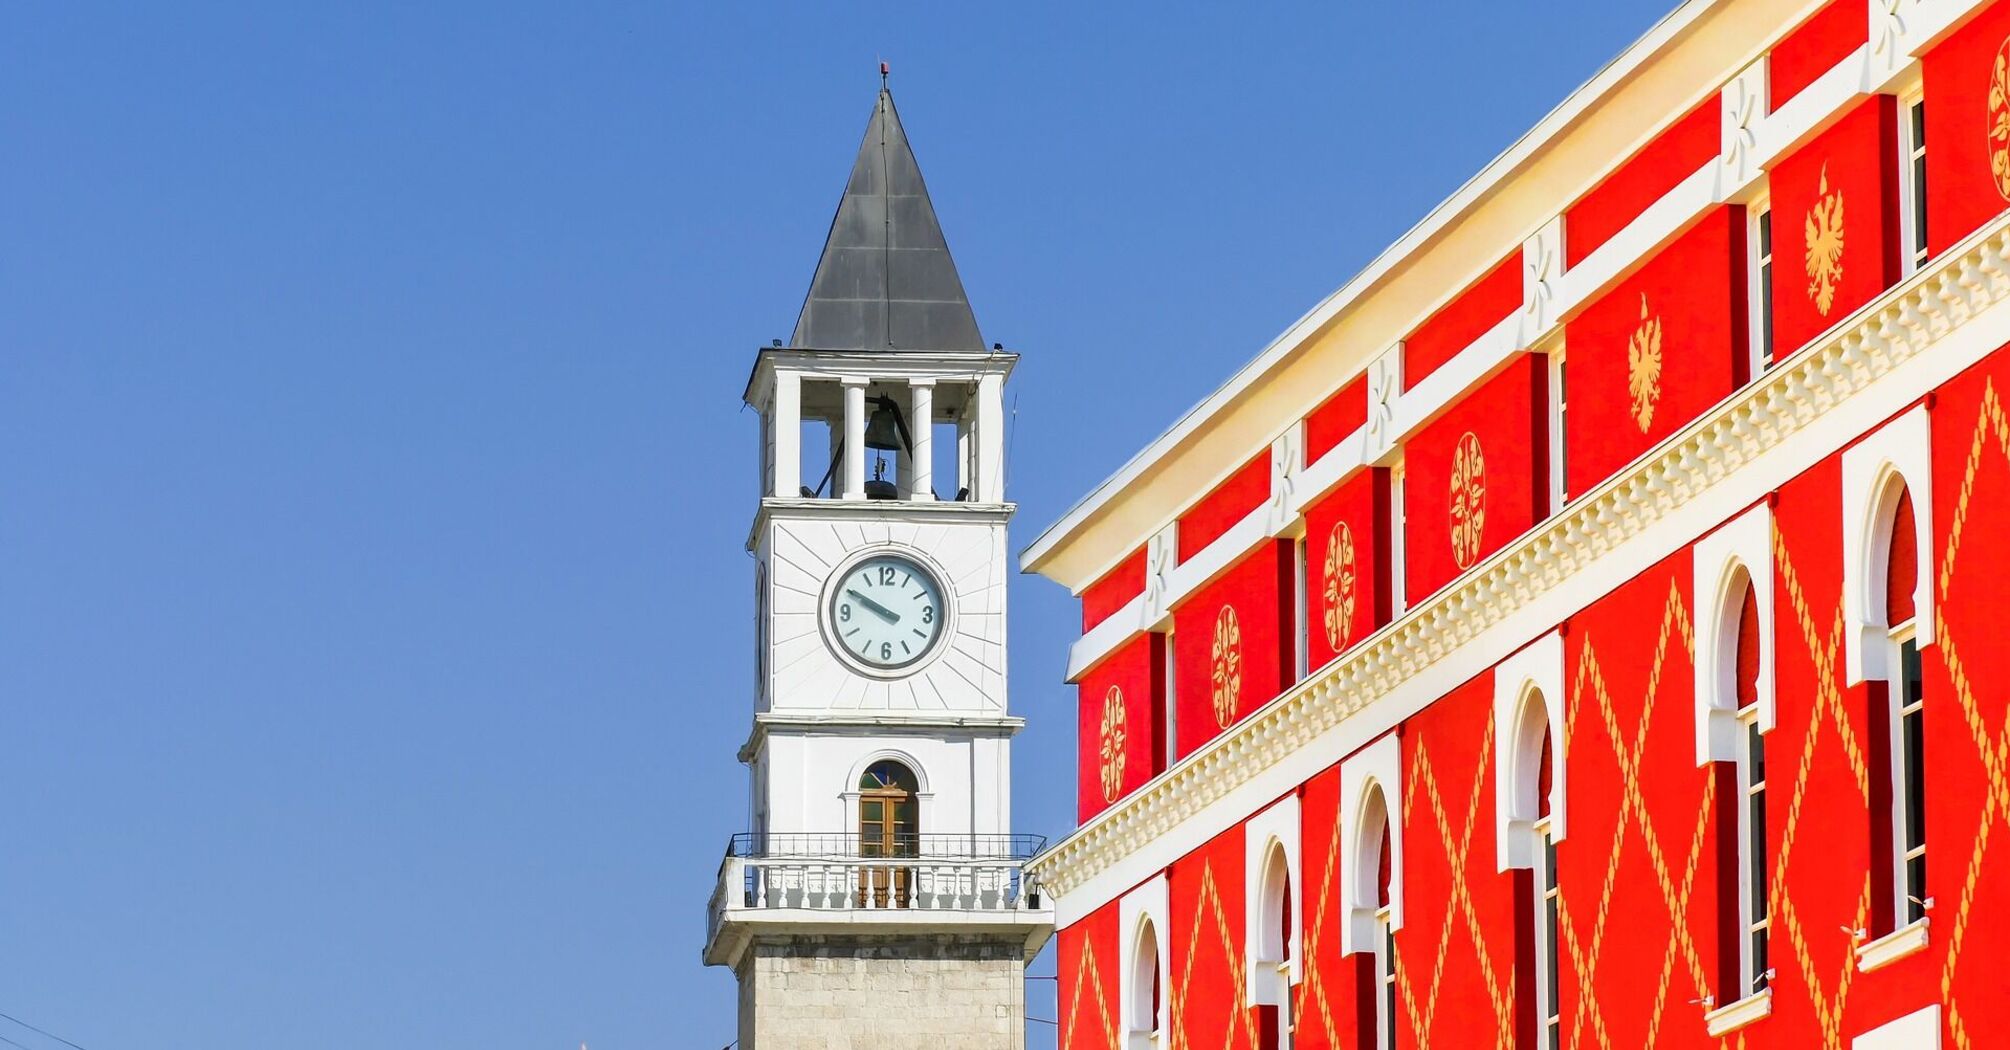 Clock tower of the historical building in Tirana, Albania against a clear blue sky